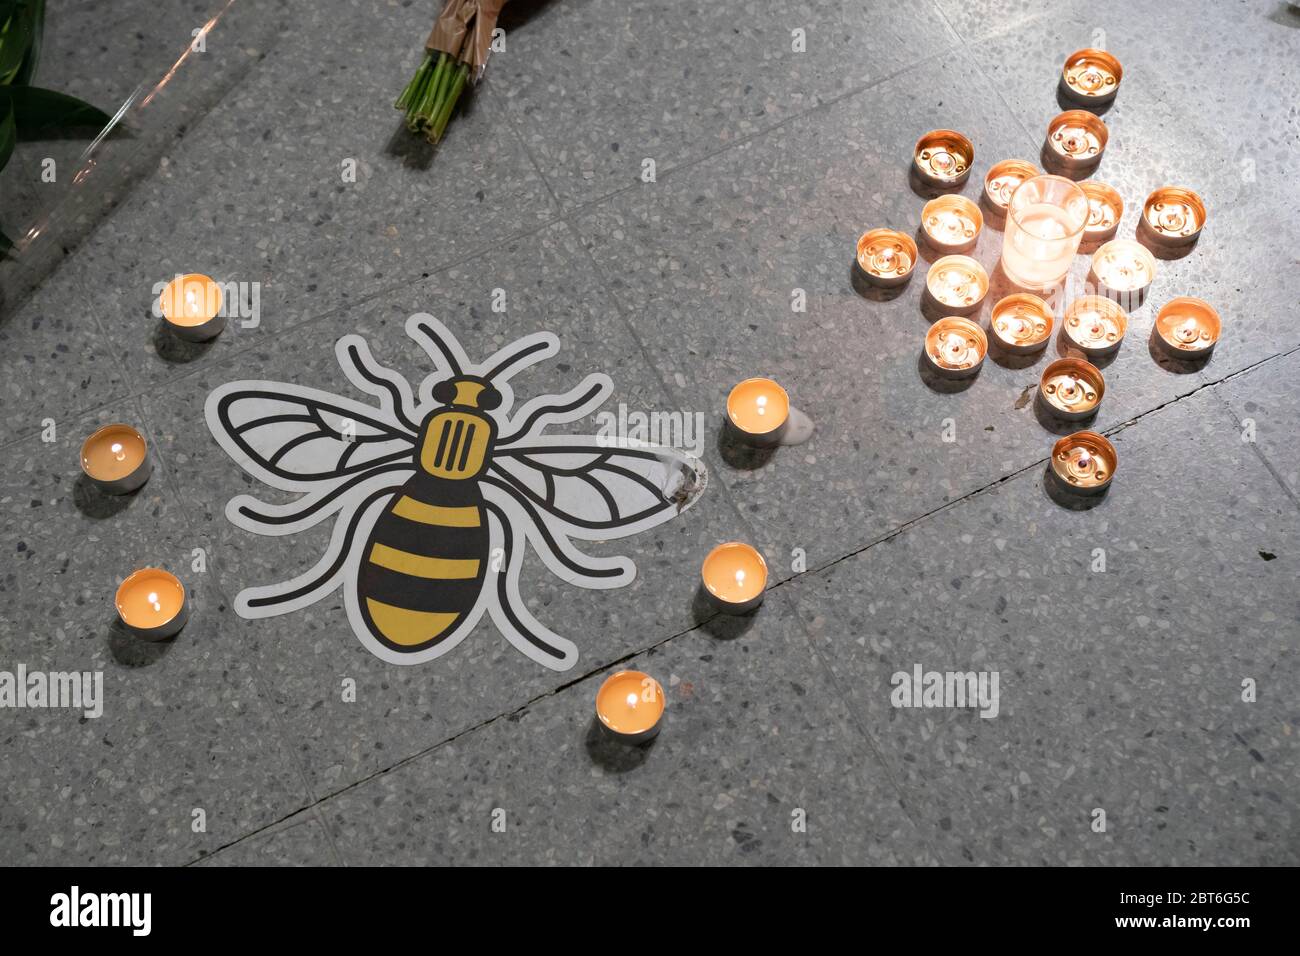 Manchester, UK. 22nd May, 2020. A Manchester bee symbol placed on the ground to encourage social distancing is seen surrounded by candles by a memorial to the victims of the Manchester Arena Bomb at Manchester Victoria Railway Station as the 3rd Anniversary of the terror attack is marked with a minuteÕs silence, Manchester, UK. Credit: Jon Super/Alamy Live News. Stock Photo